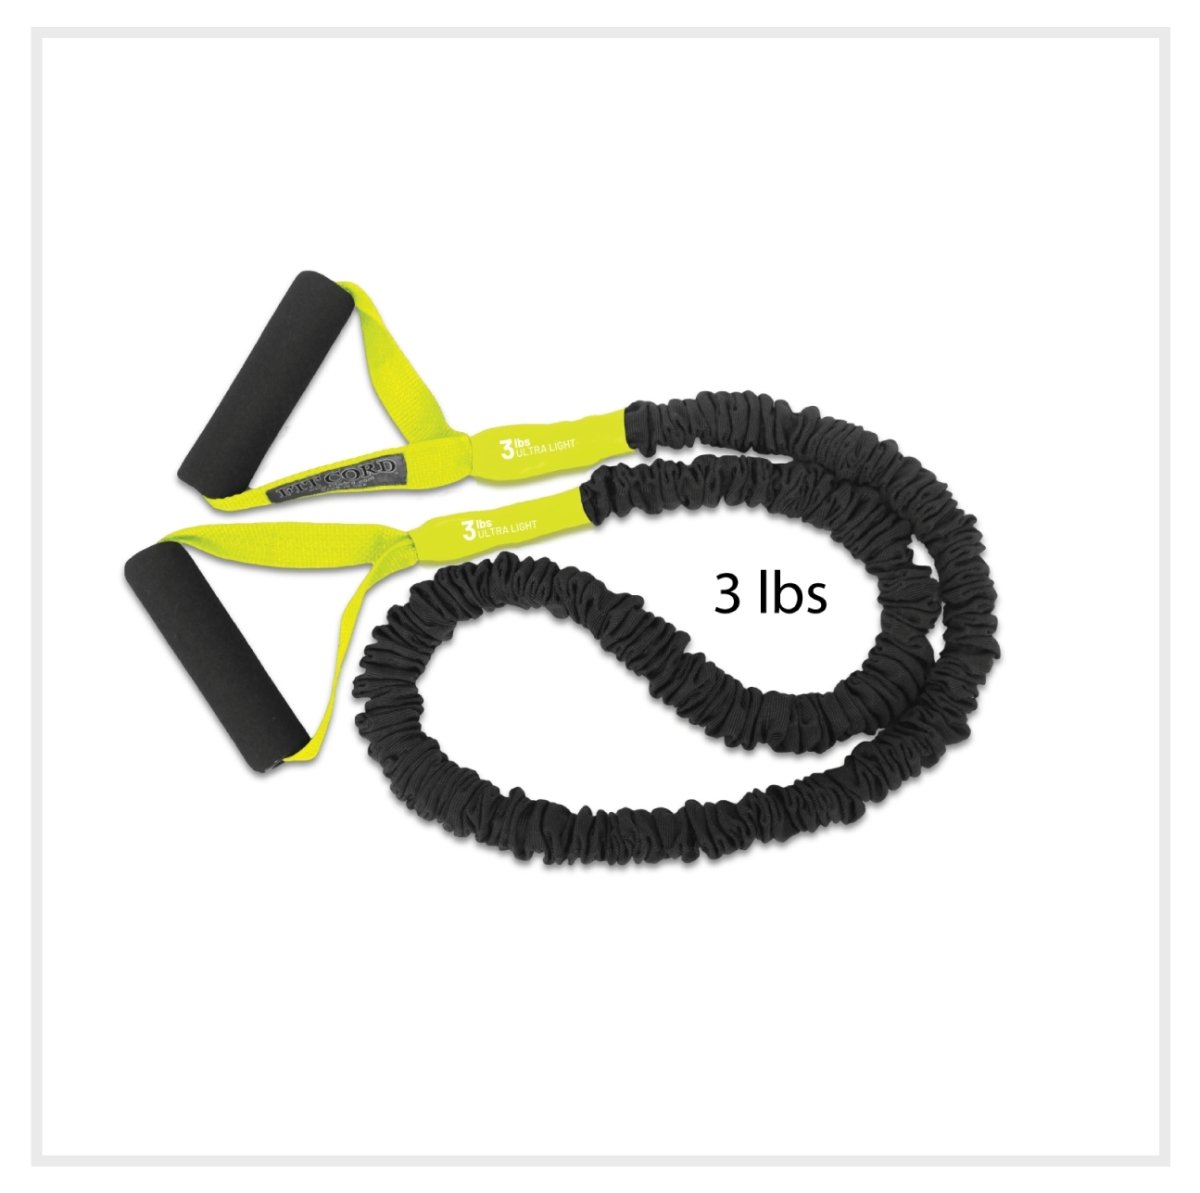 Extra long American made workout band with Ultra Light resistance level. Covered for safety and has padded handles. Compare to Stroops but better quality and lasts longer